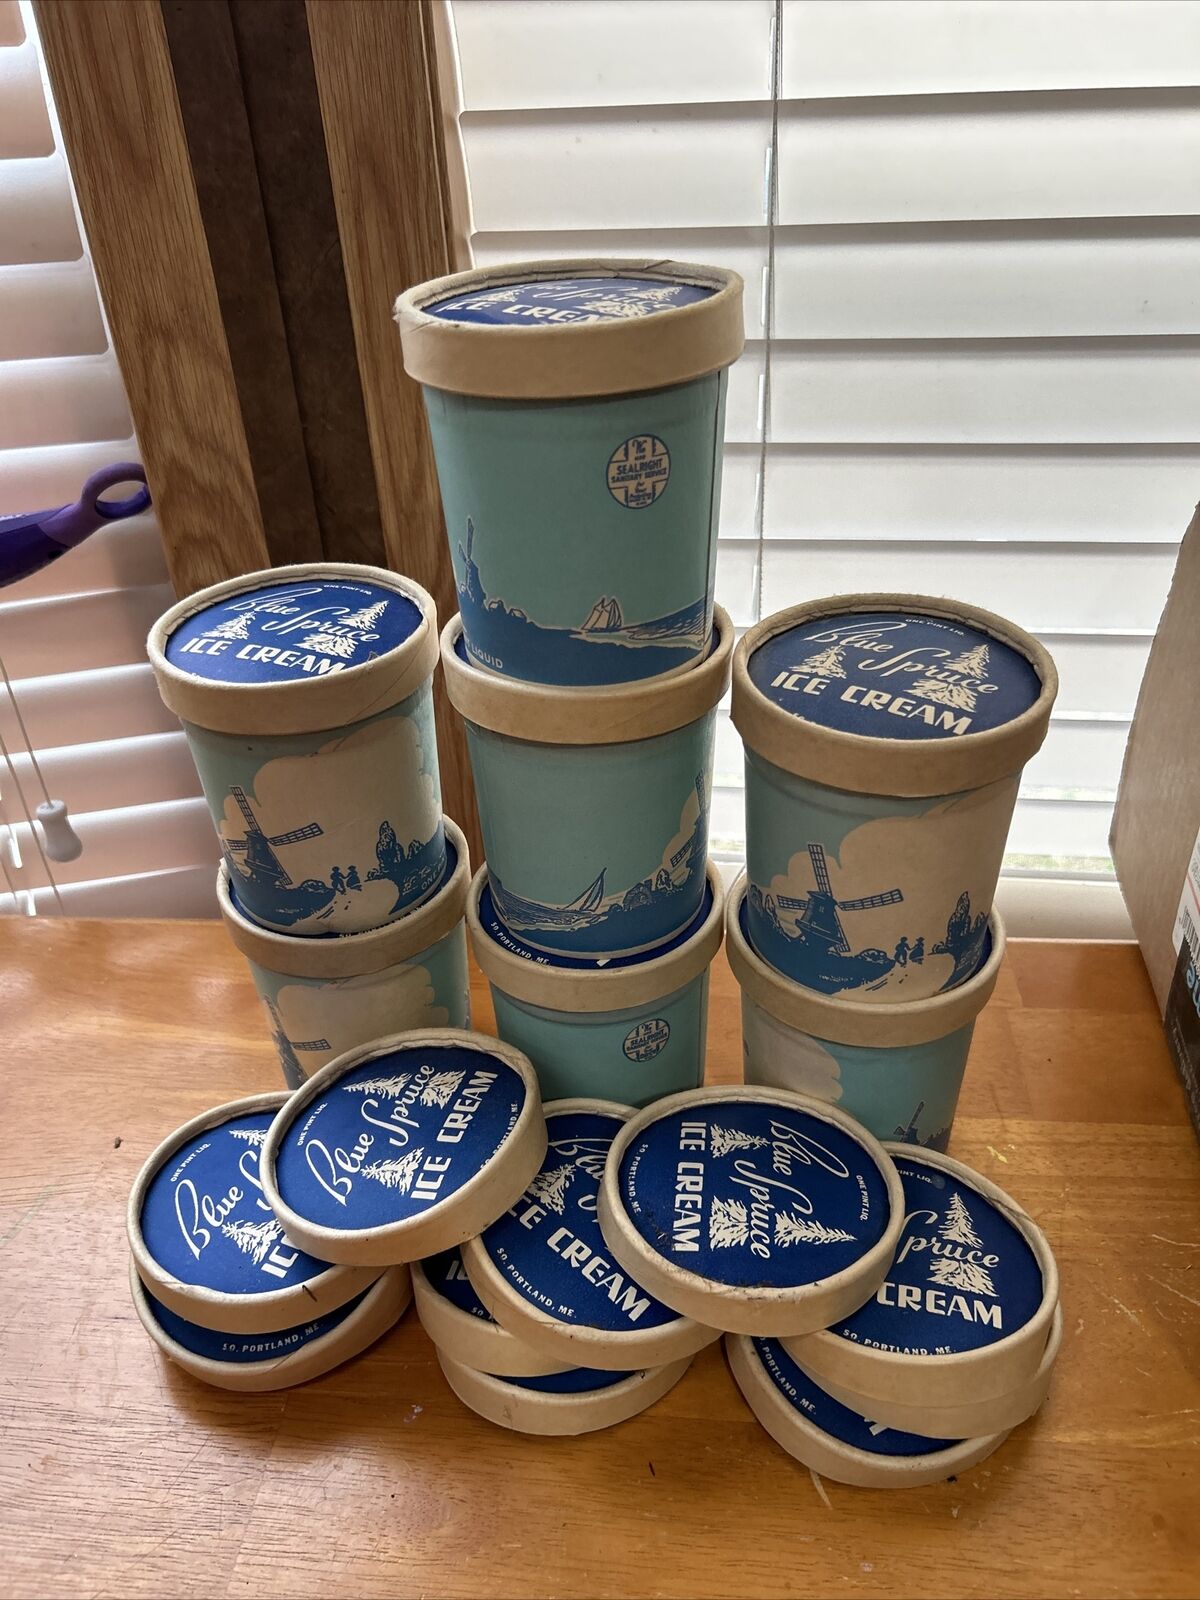 Lot of Old Blue Spruce Ice Cream ADVERTISING CONTAINERS w/ Lids PORTLAND, ME